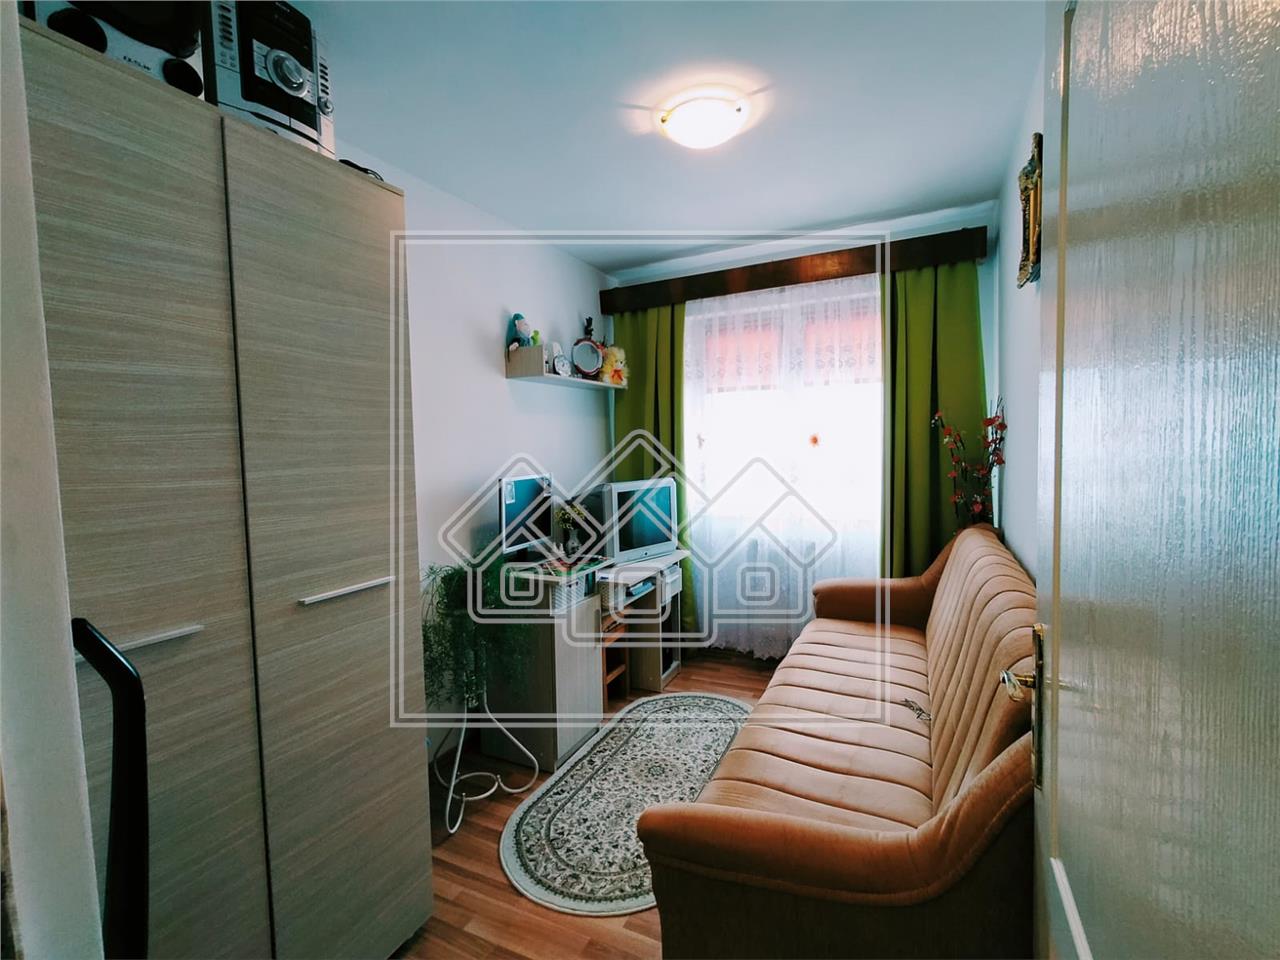 Apartment for sale in Sibiu - 3 rooms - balcony - Cisnadie area